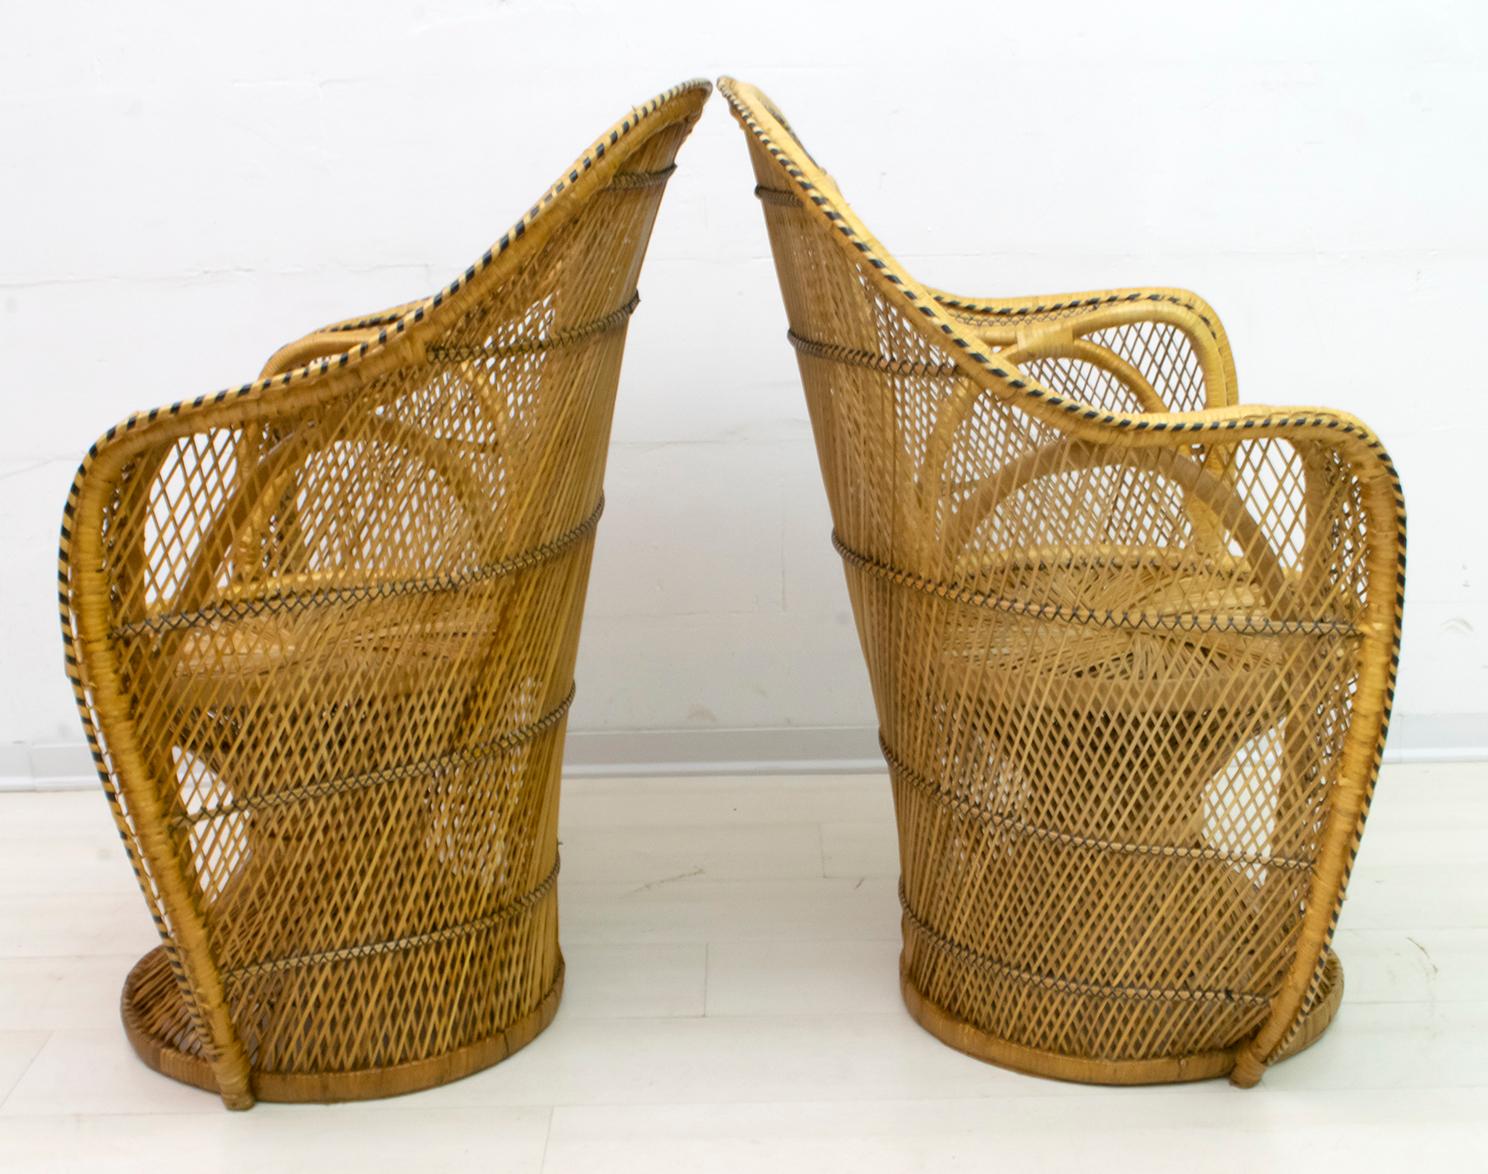 Pair of Mid-Century Modern Wicker Emmanuelle Armchairs from Kok Maison, 1970s For Sale 1